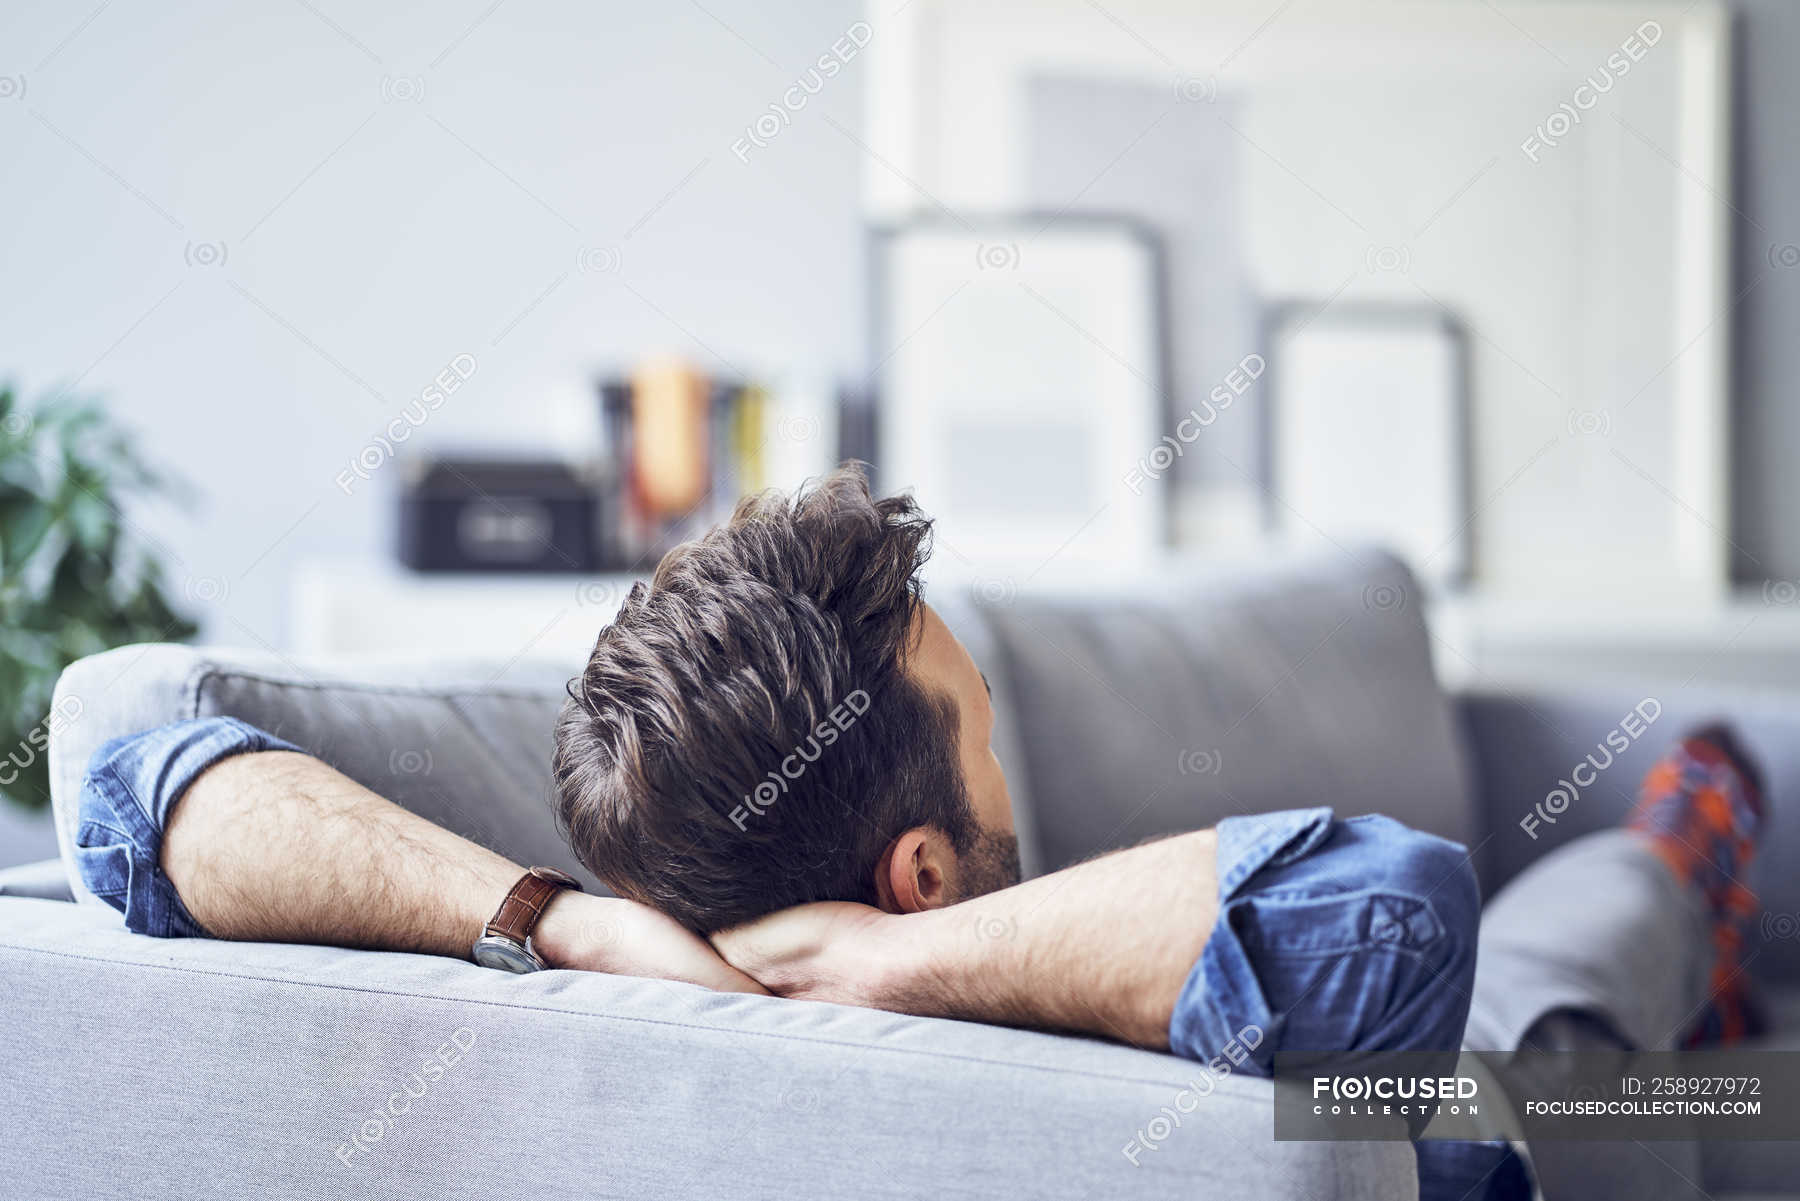 Relaxed man lying on sofa — copy space, napping Stock Photo | #258927972